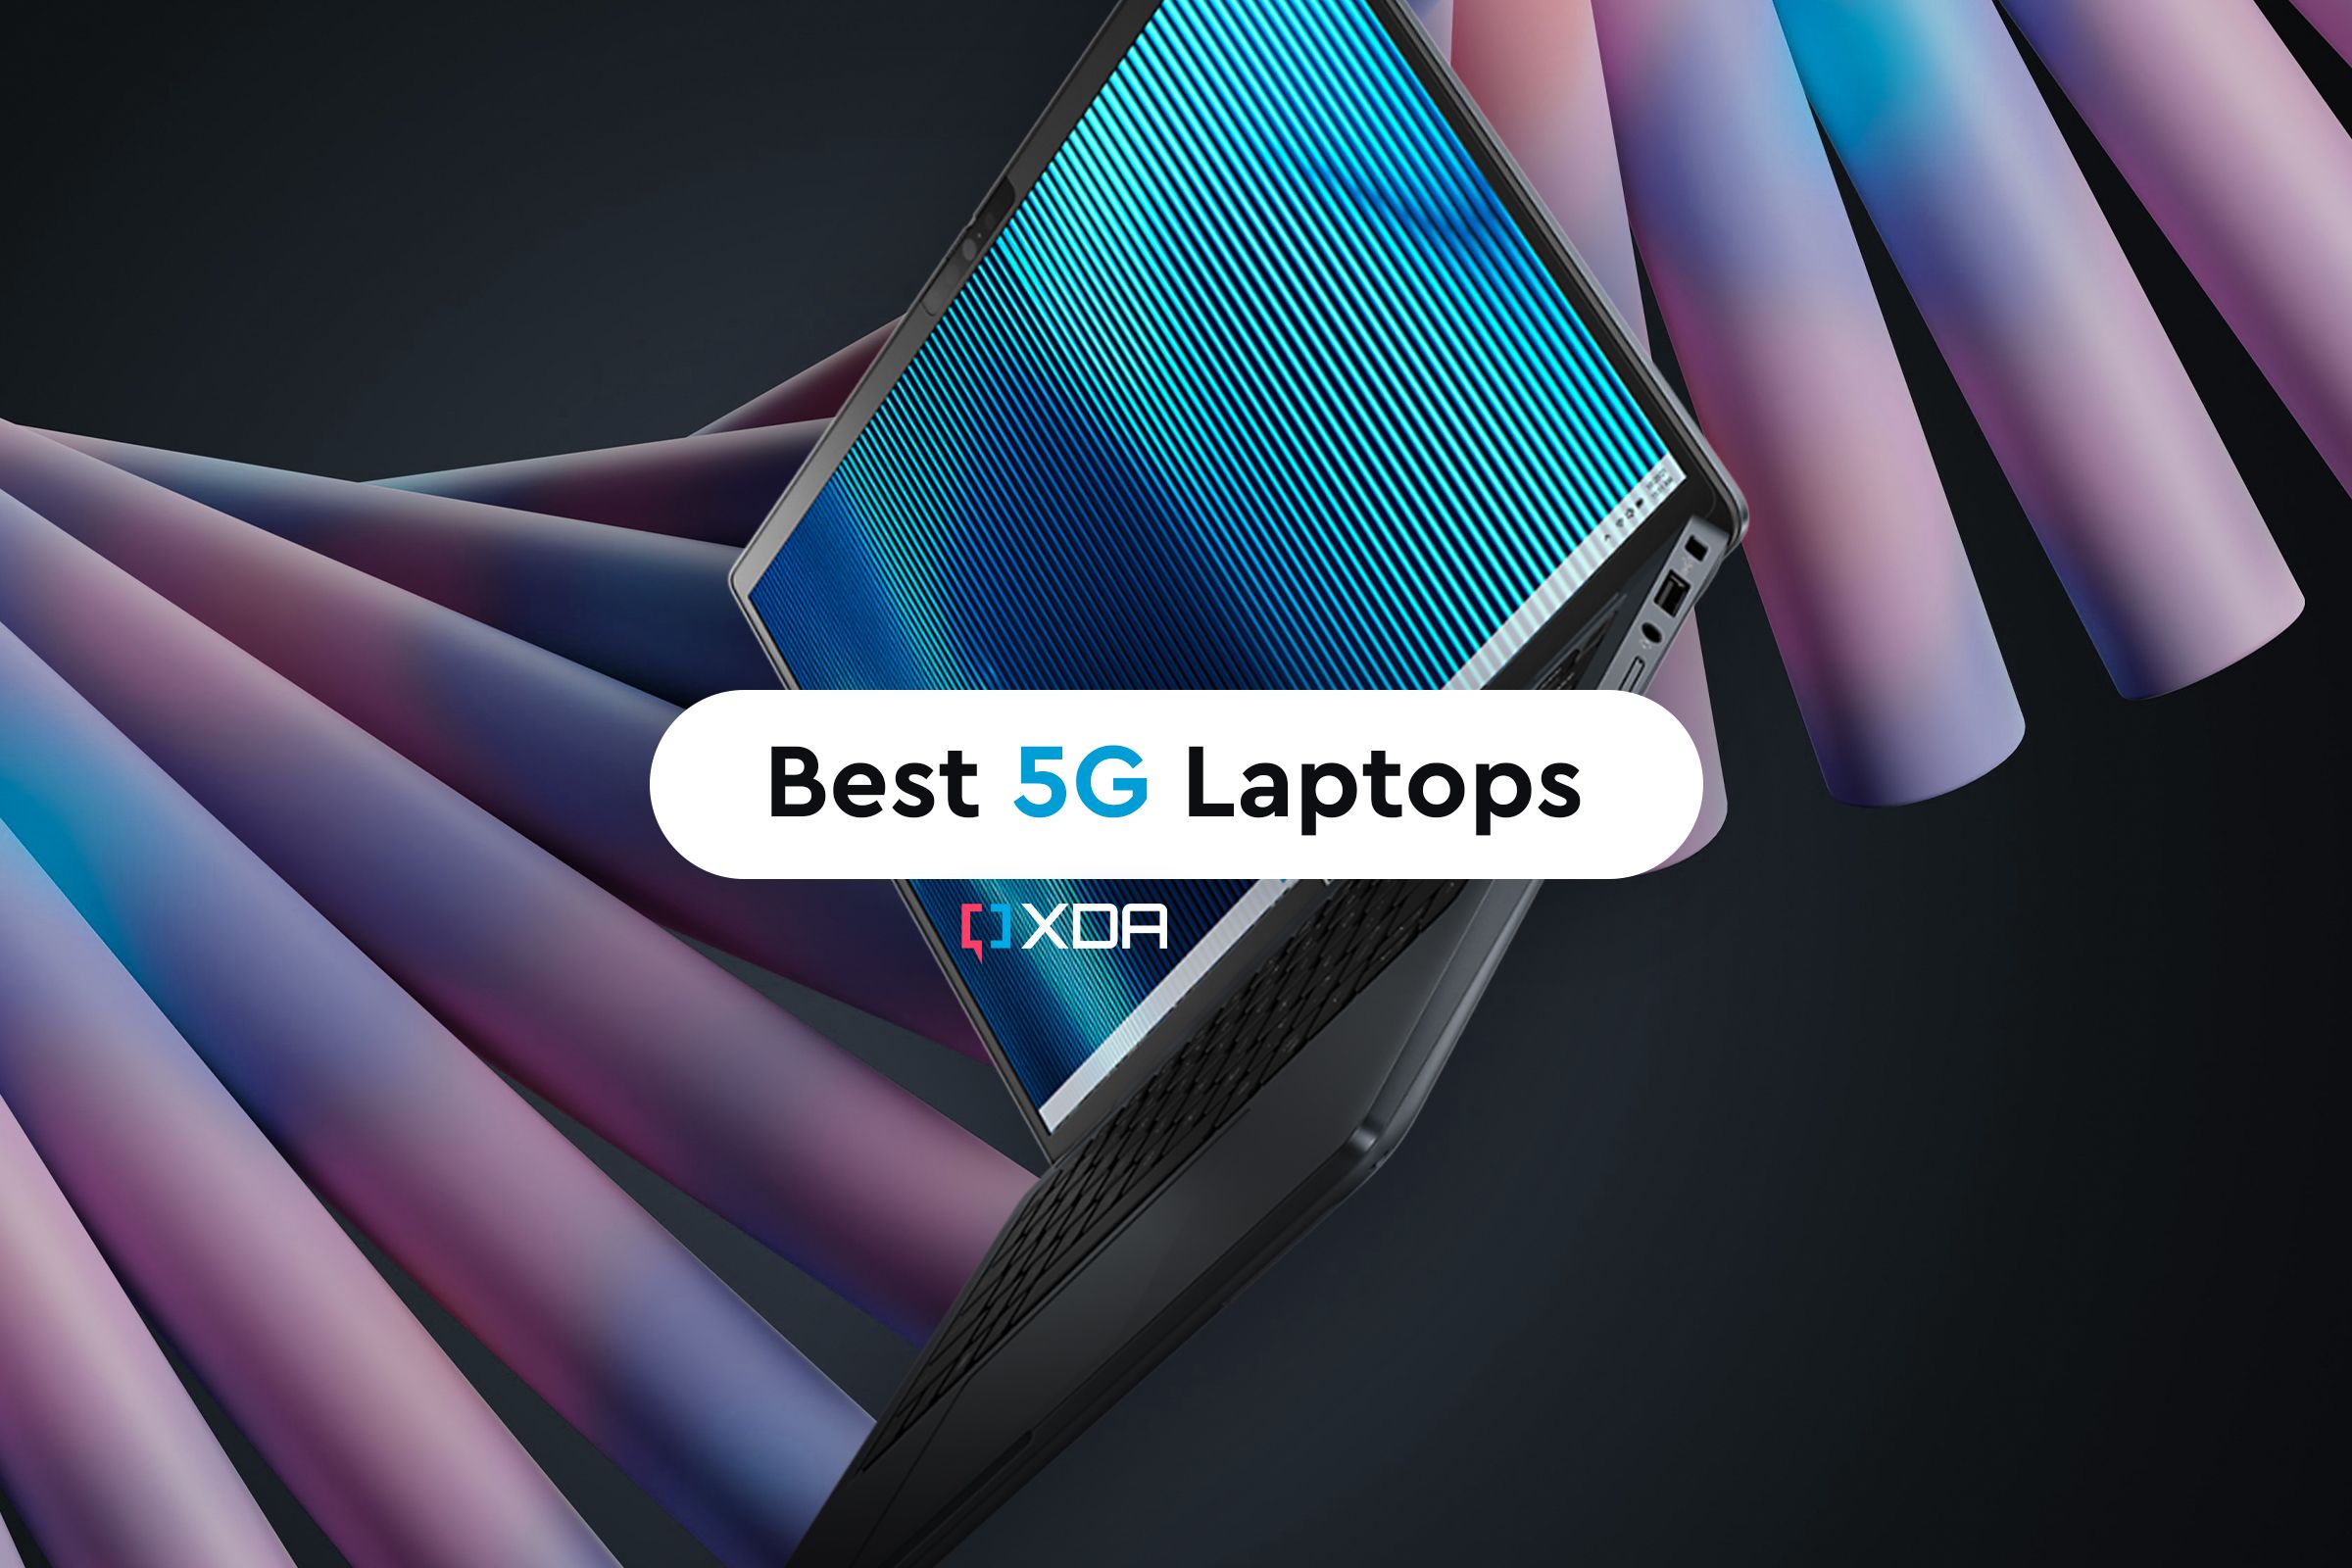 Text reading Best 5G Laptops over a picture of a laptop with purple and blue designs in the background